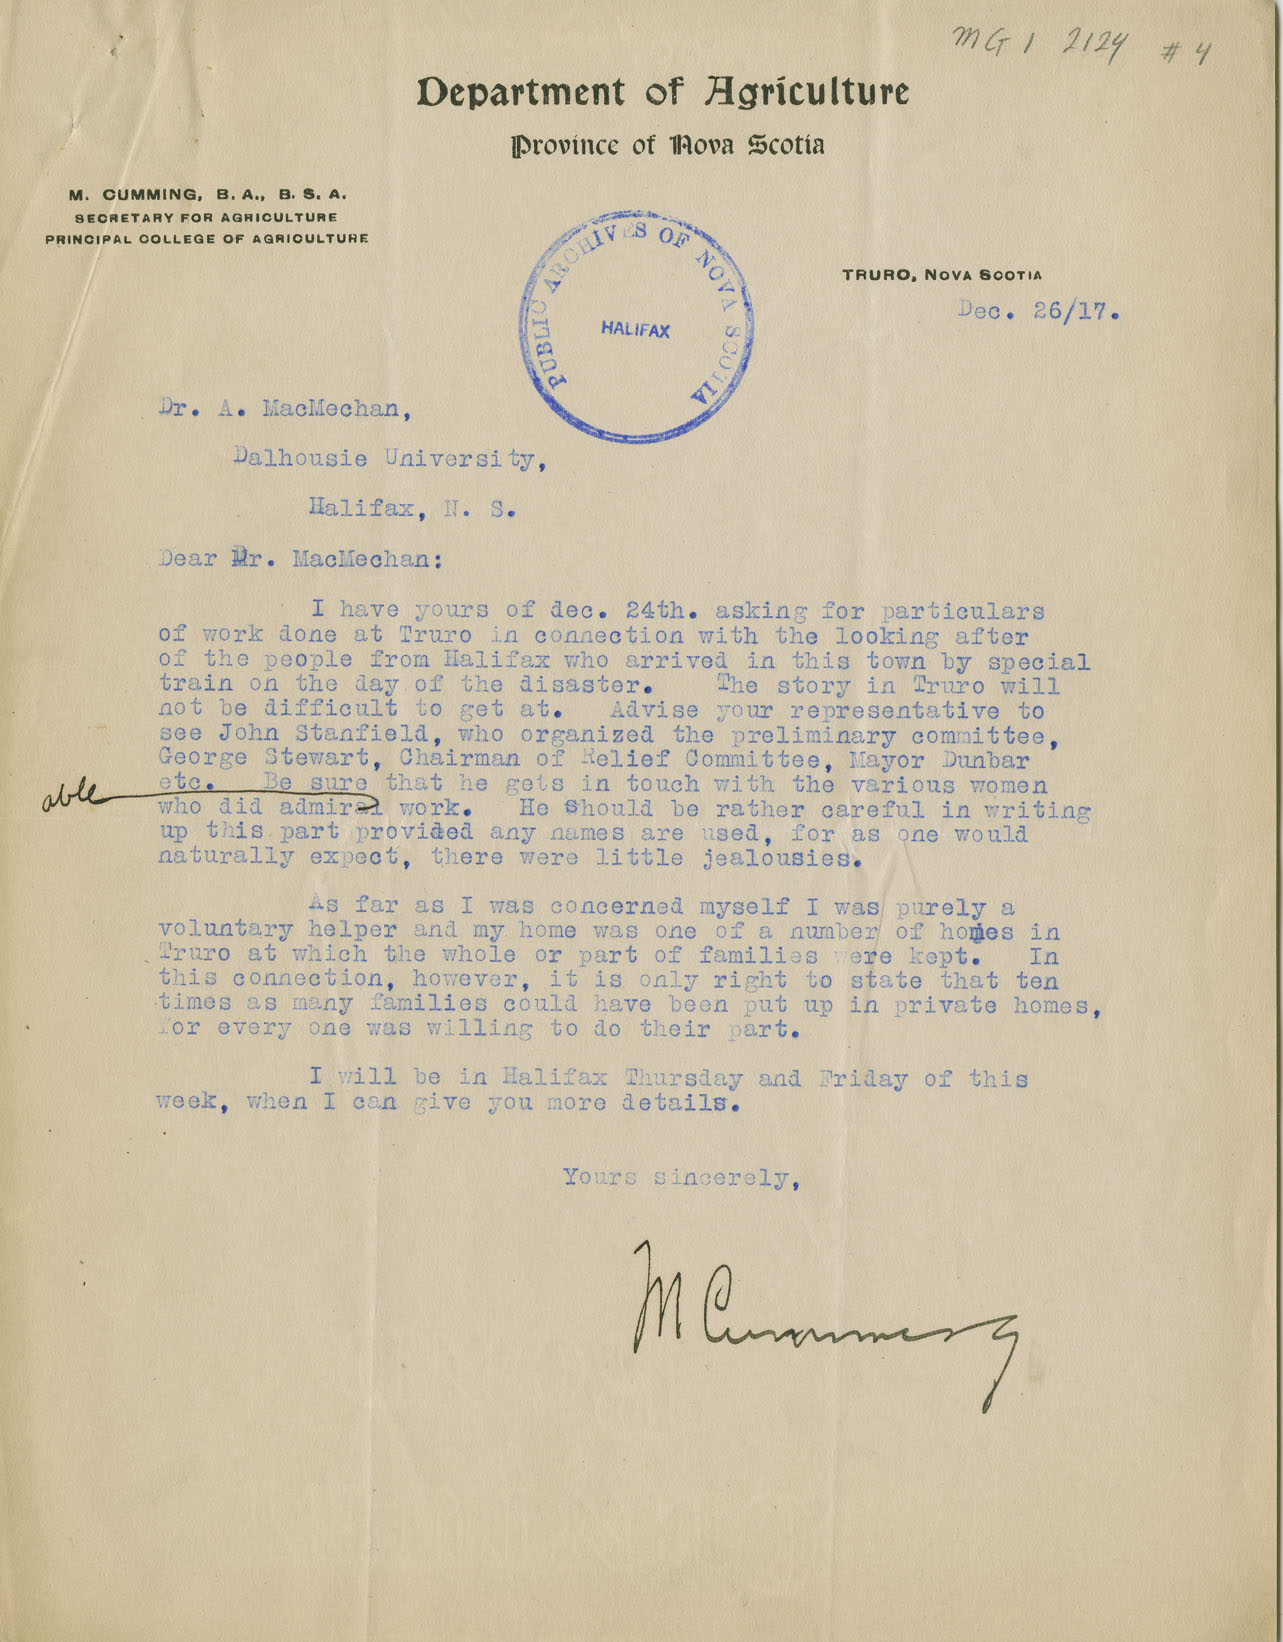 Letter from M. Cumming, Department of Agriculture, Truro to R.A. MacMechan